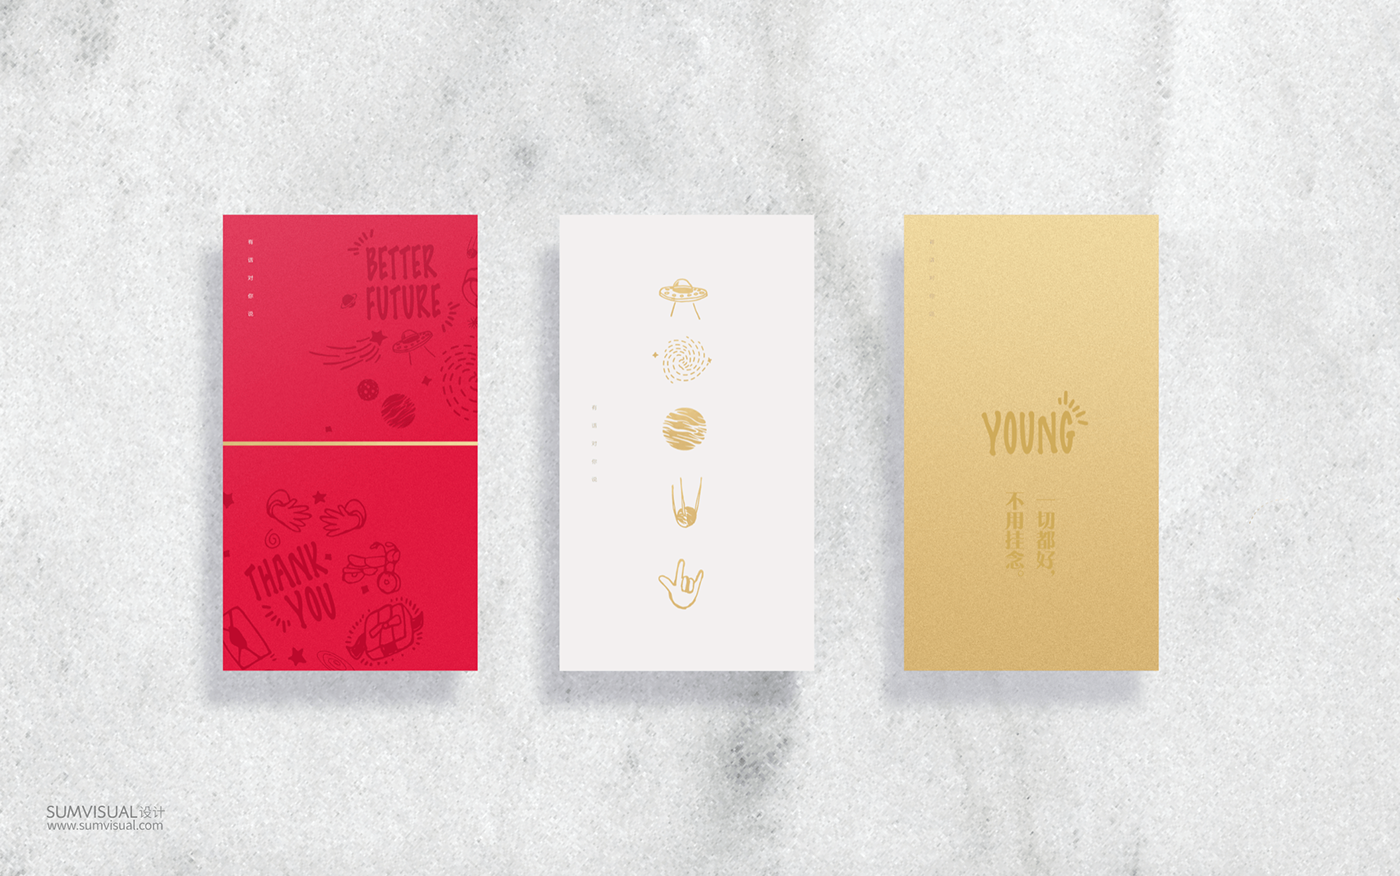 chinese new year SUMVISUAL alibaba group packaging design gift family book ILLUSTRATION  spring festival